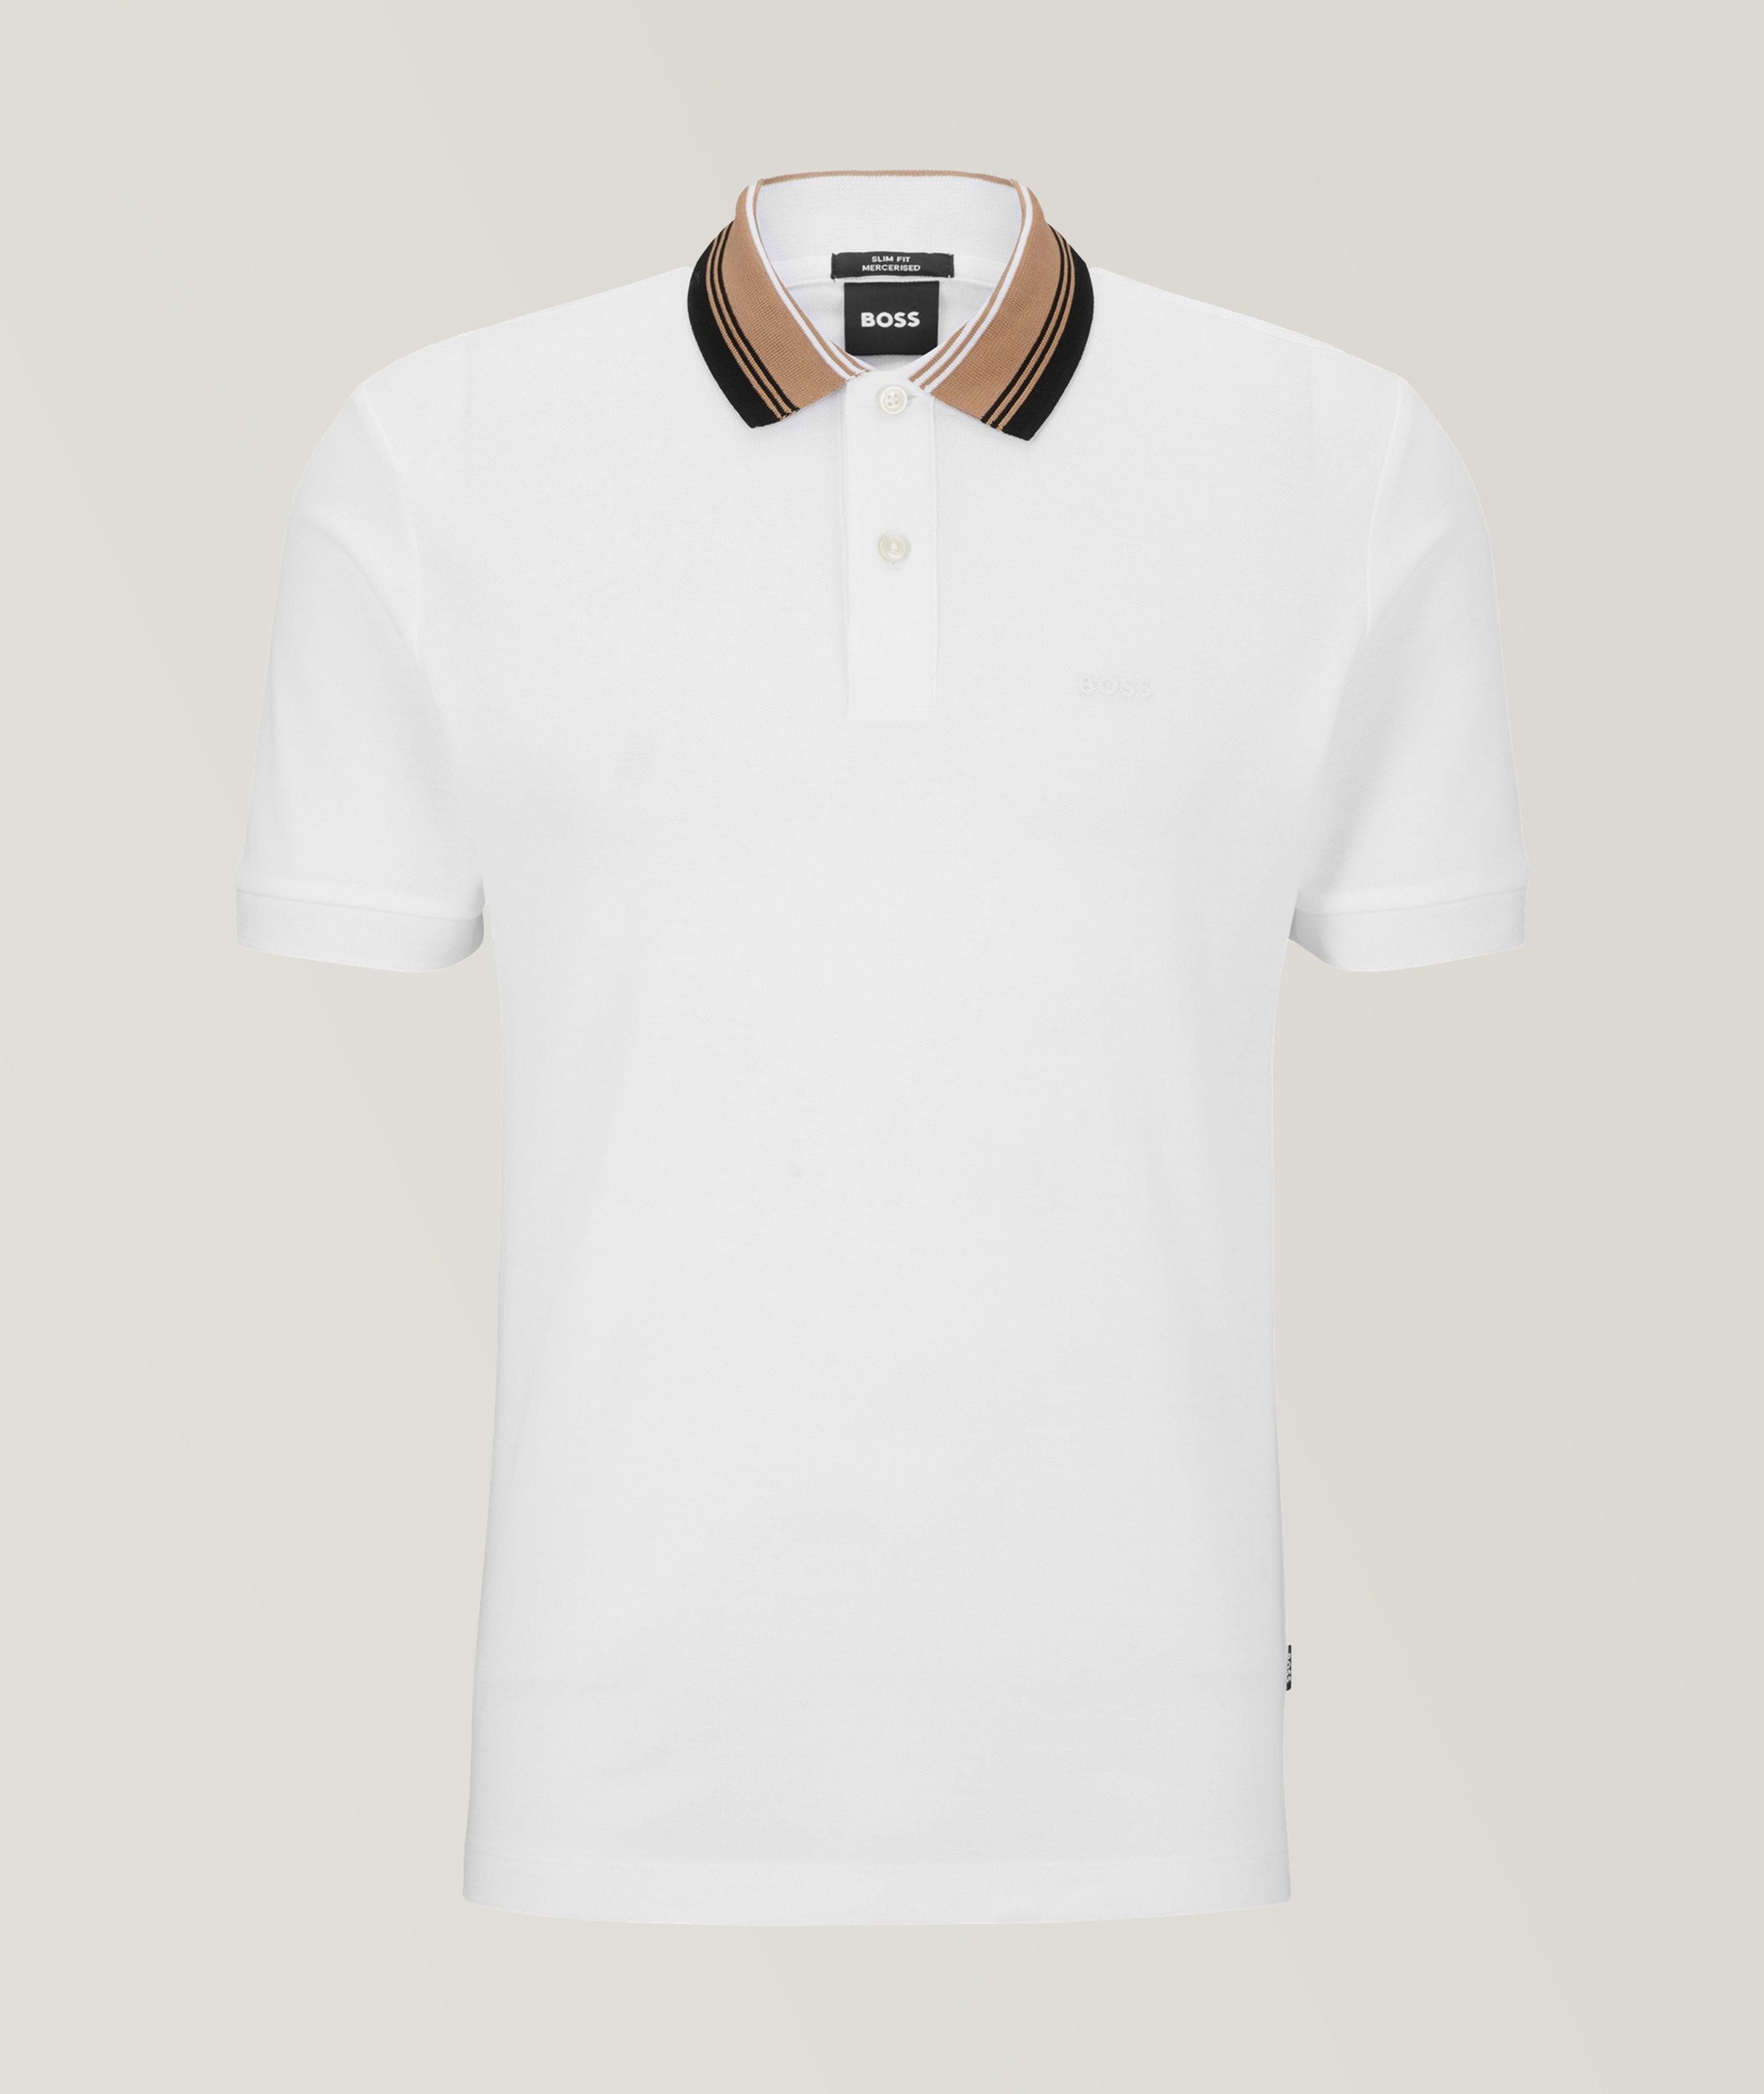 Contrast Tipped Mercerized Cotton Polo image 0